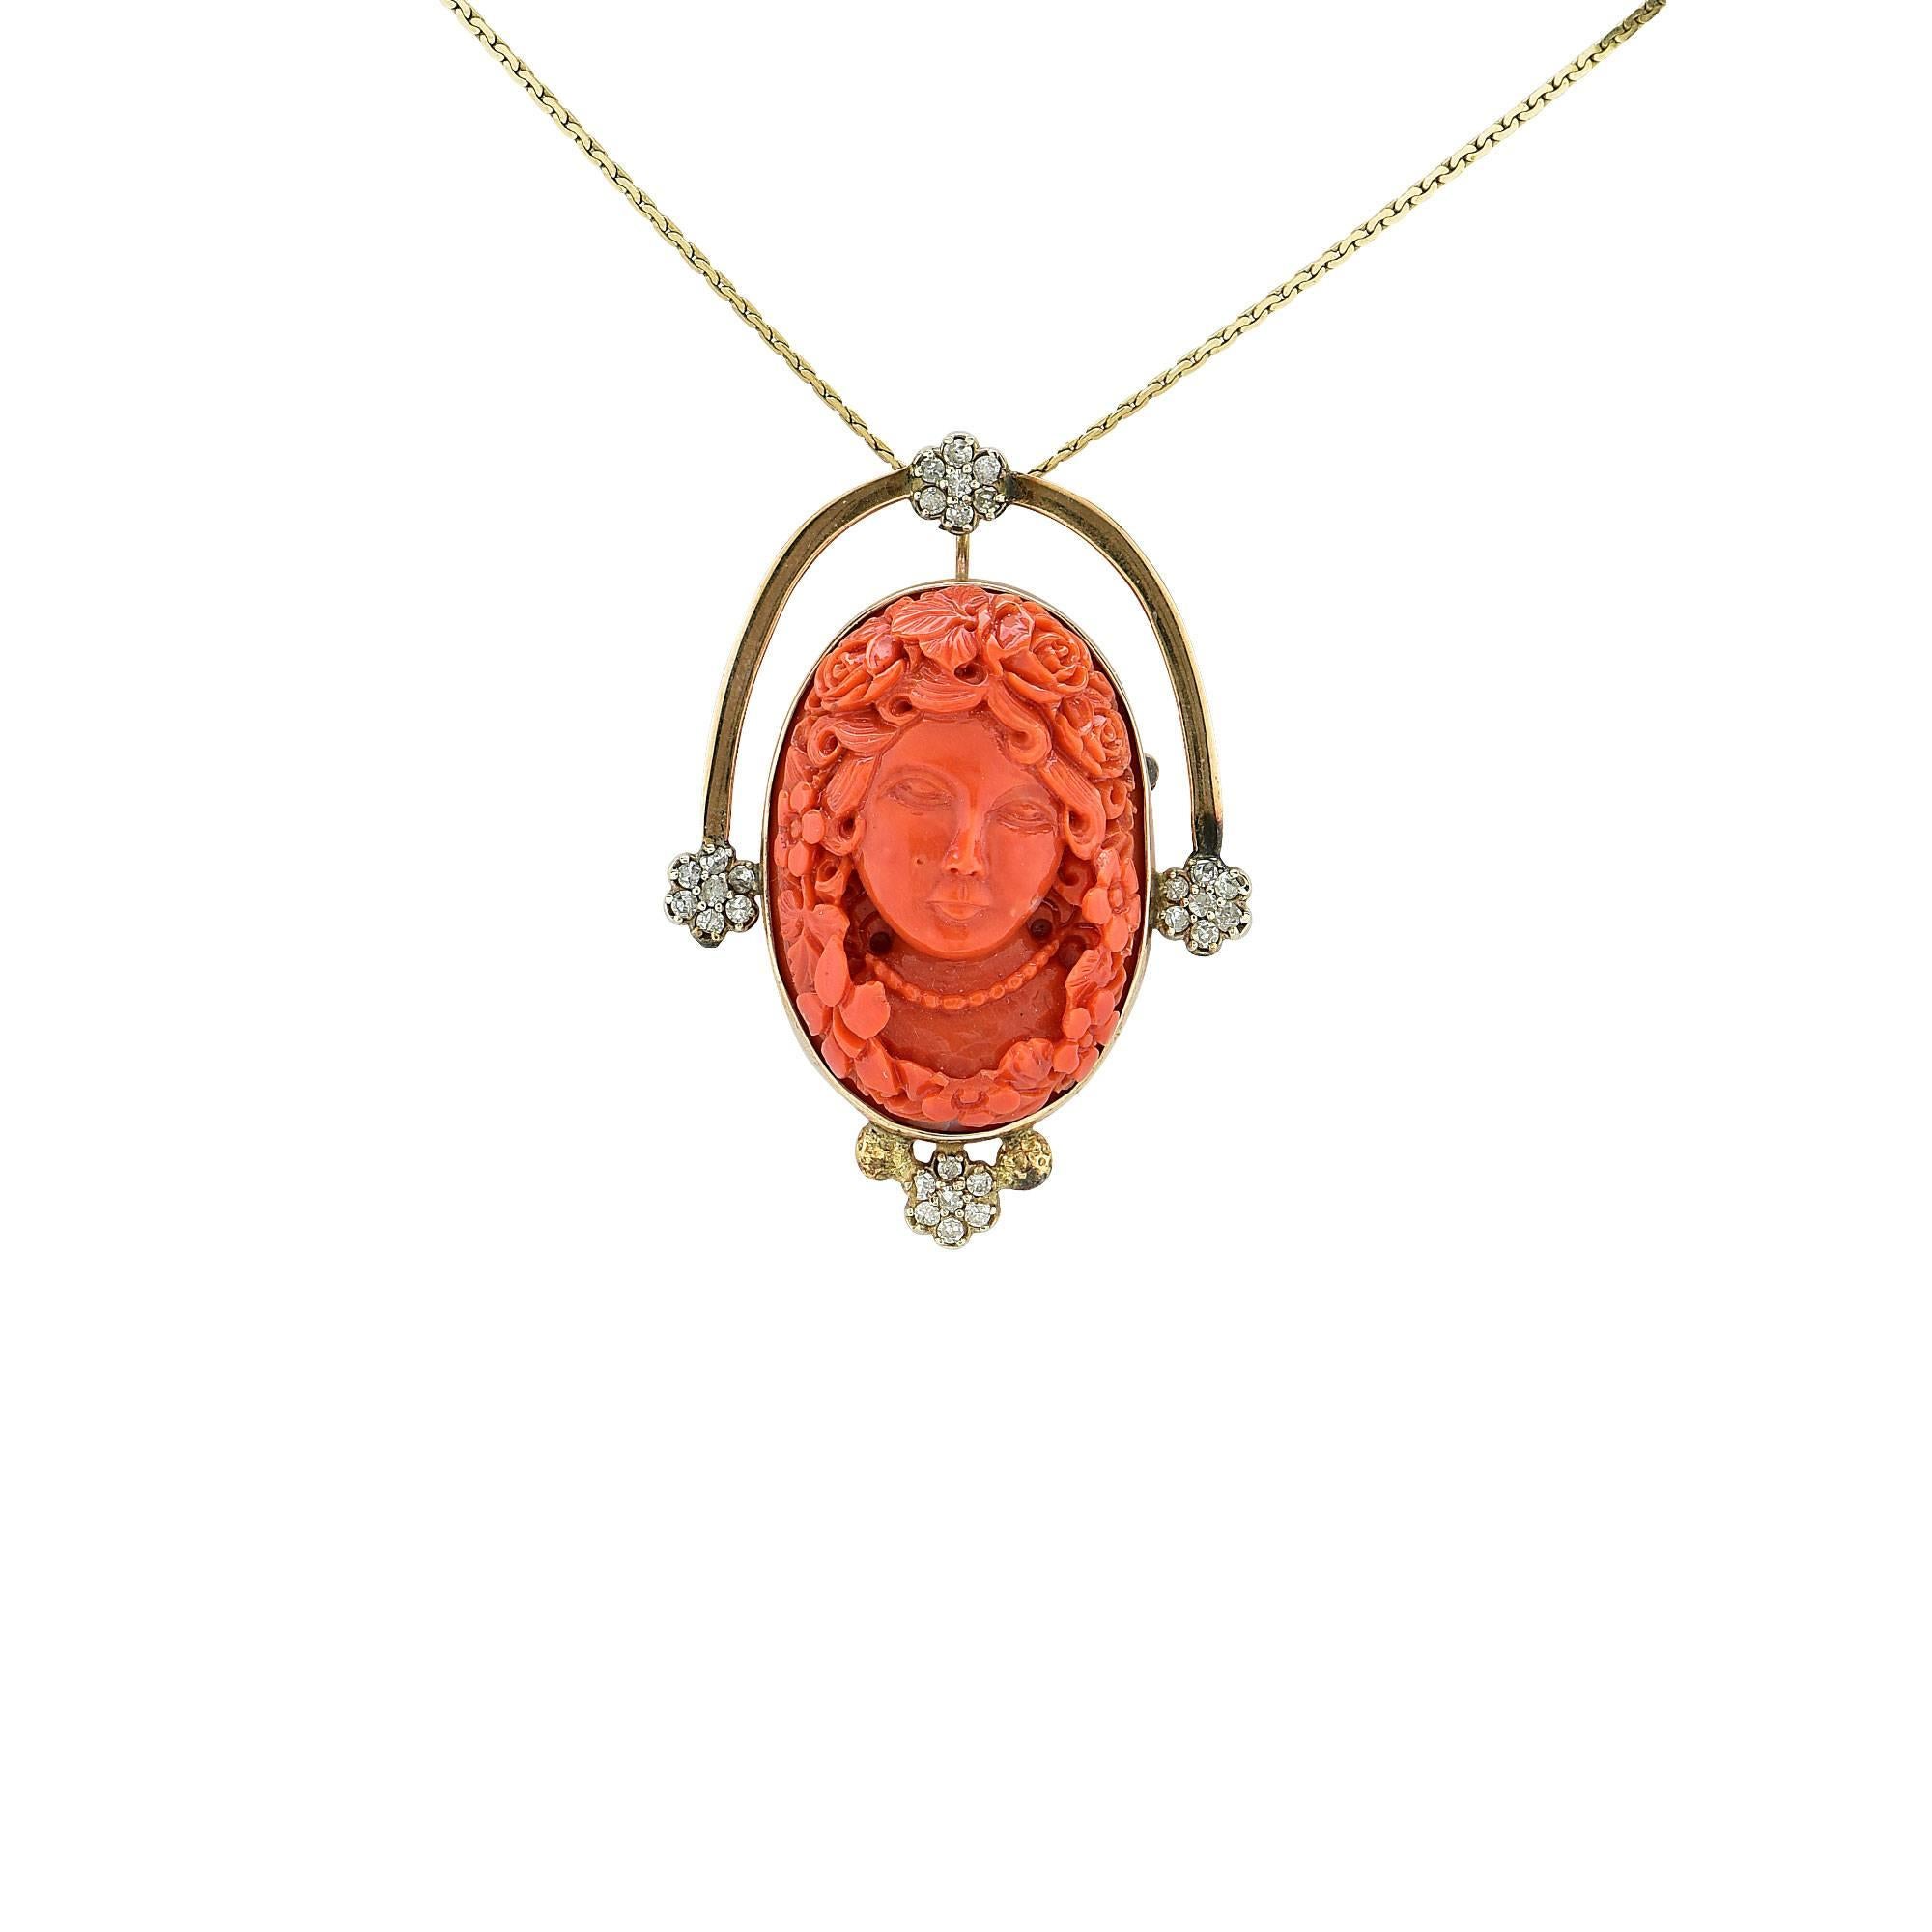 18k yellow gold coral cameo necklace accented by 28 single cut diamonds weighing approximately .40cts total.

Metal weight: 20.52 grams

This diamond ring is accompanied by a retail appraisal performed by a GIA Graduate Gemologist.